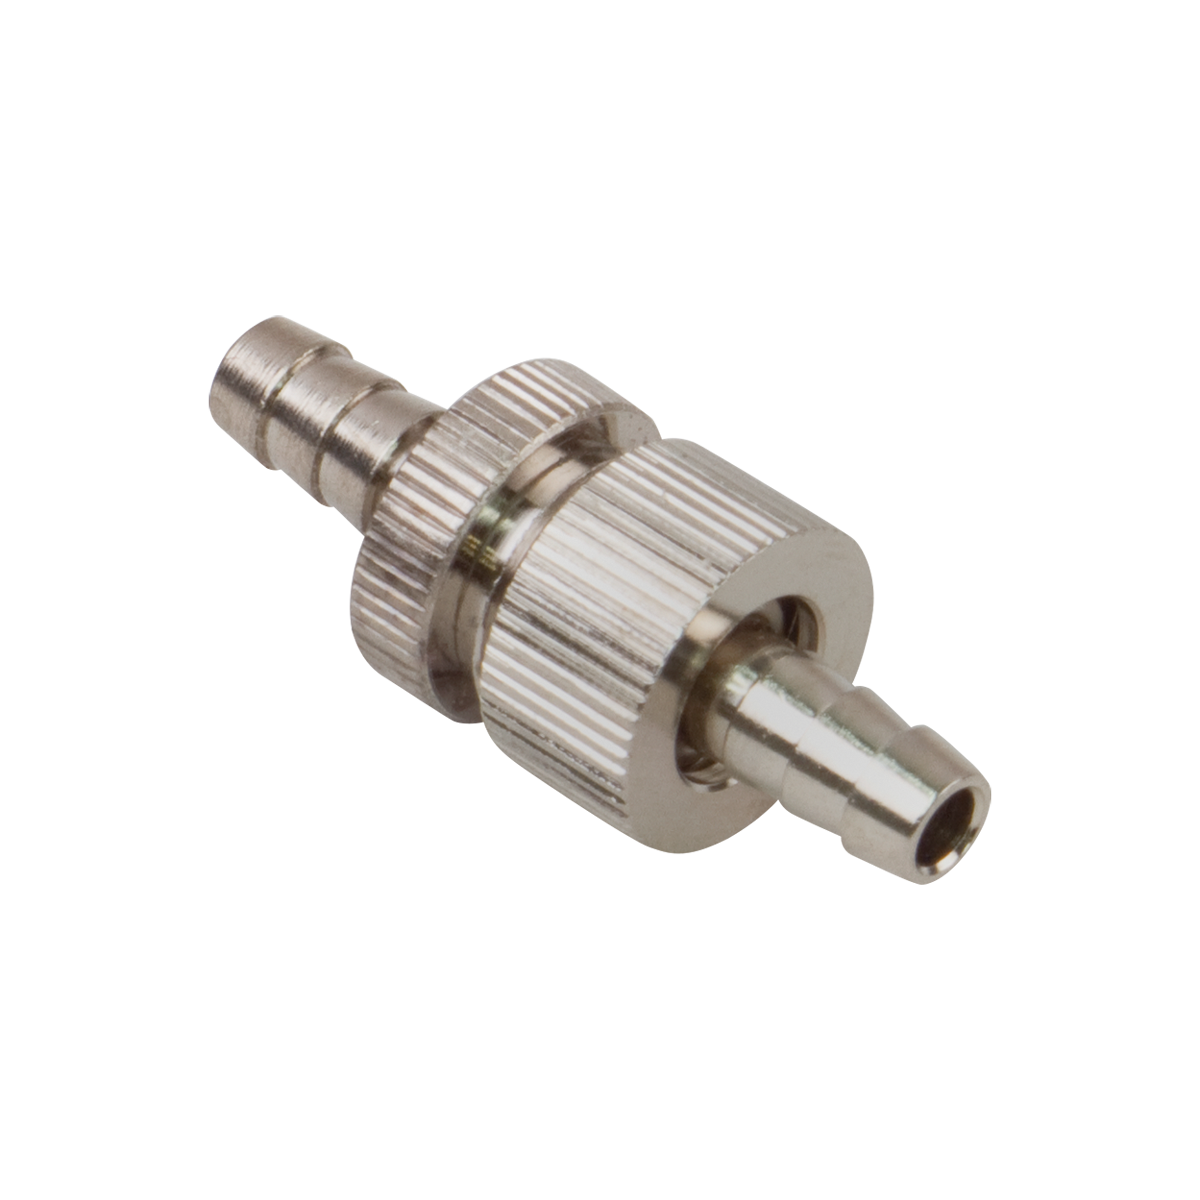 1/4" Quick Connect Couplers (Metal)